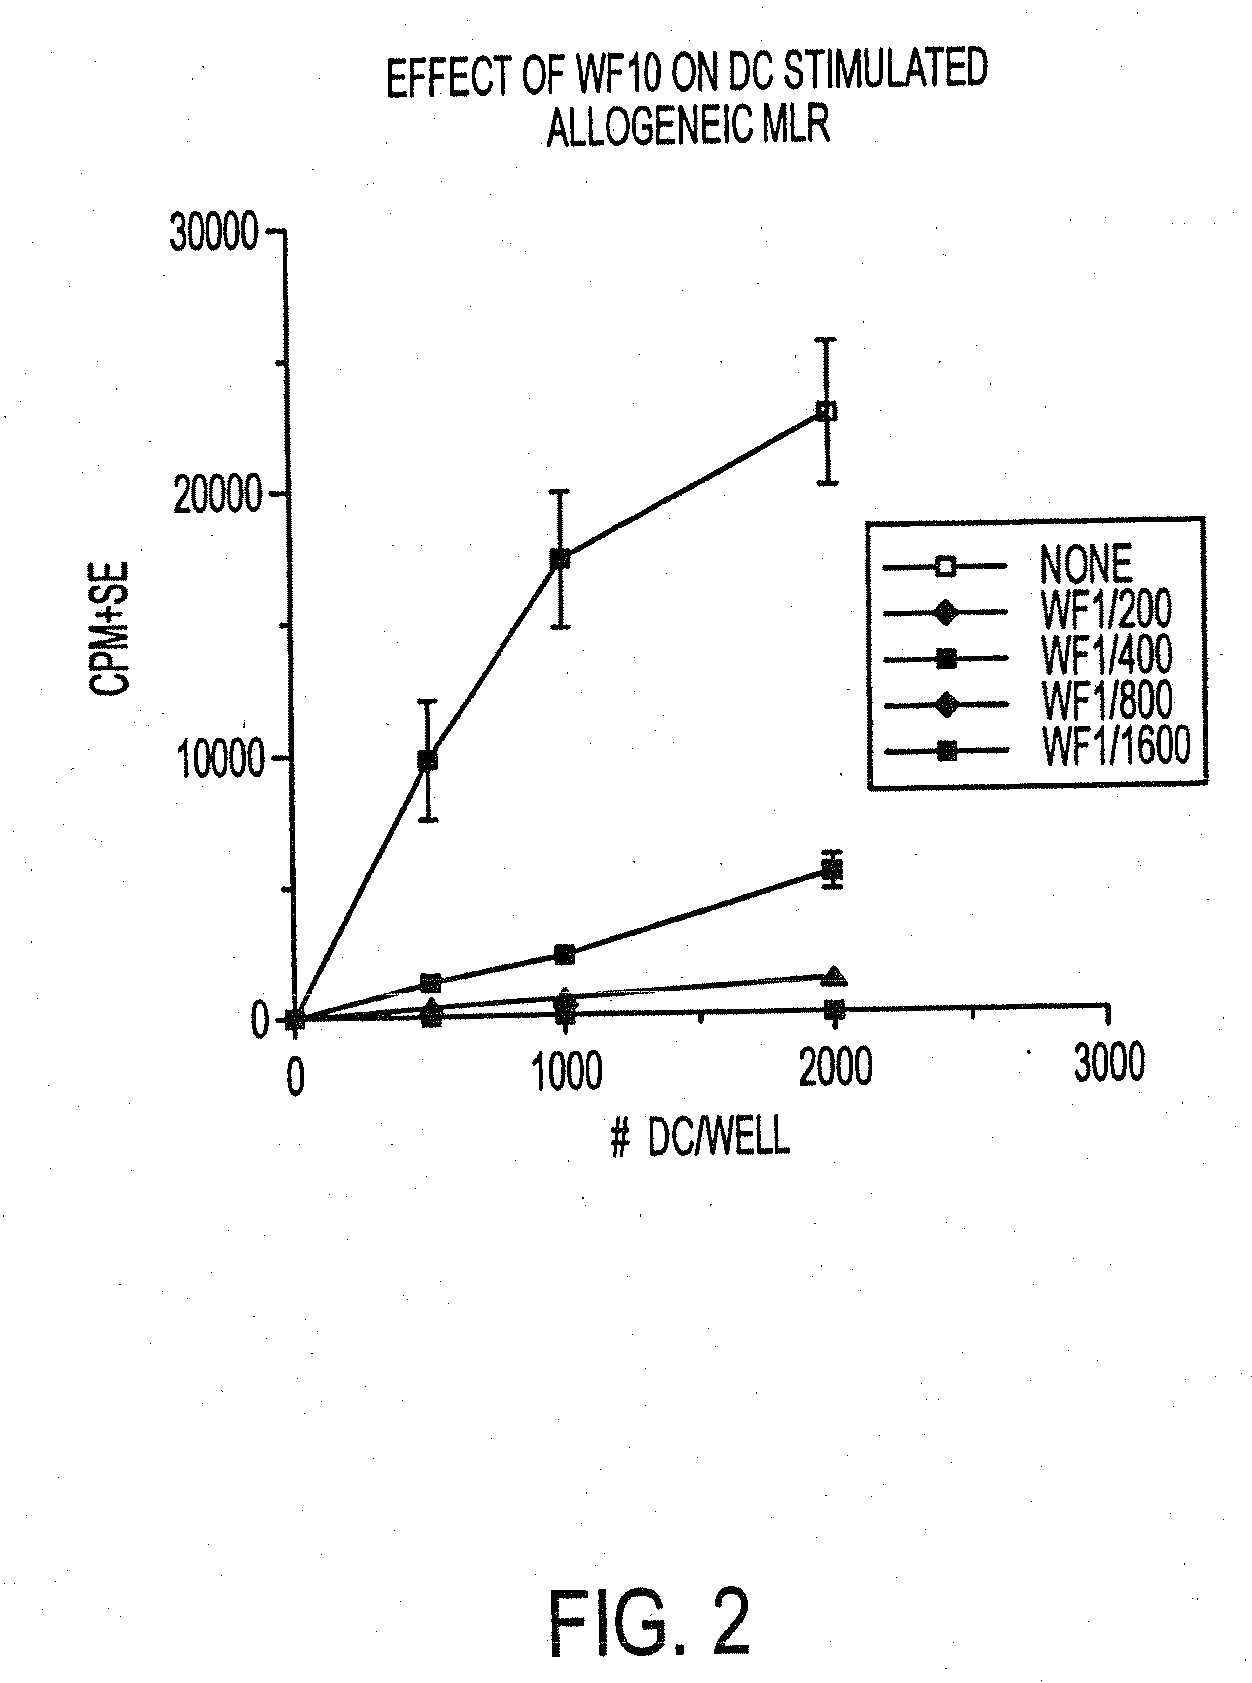 Use of a chemically-stabilized chlorite solution for inhibiting an antigen-specific immune response